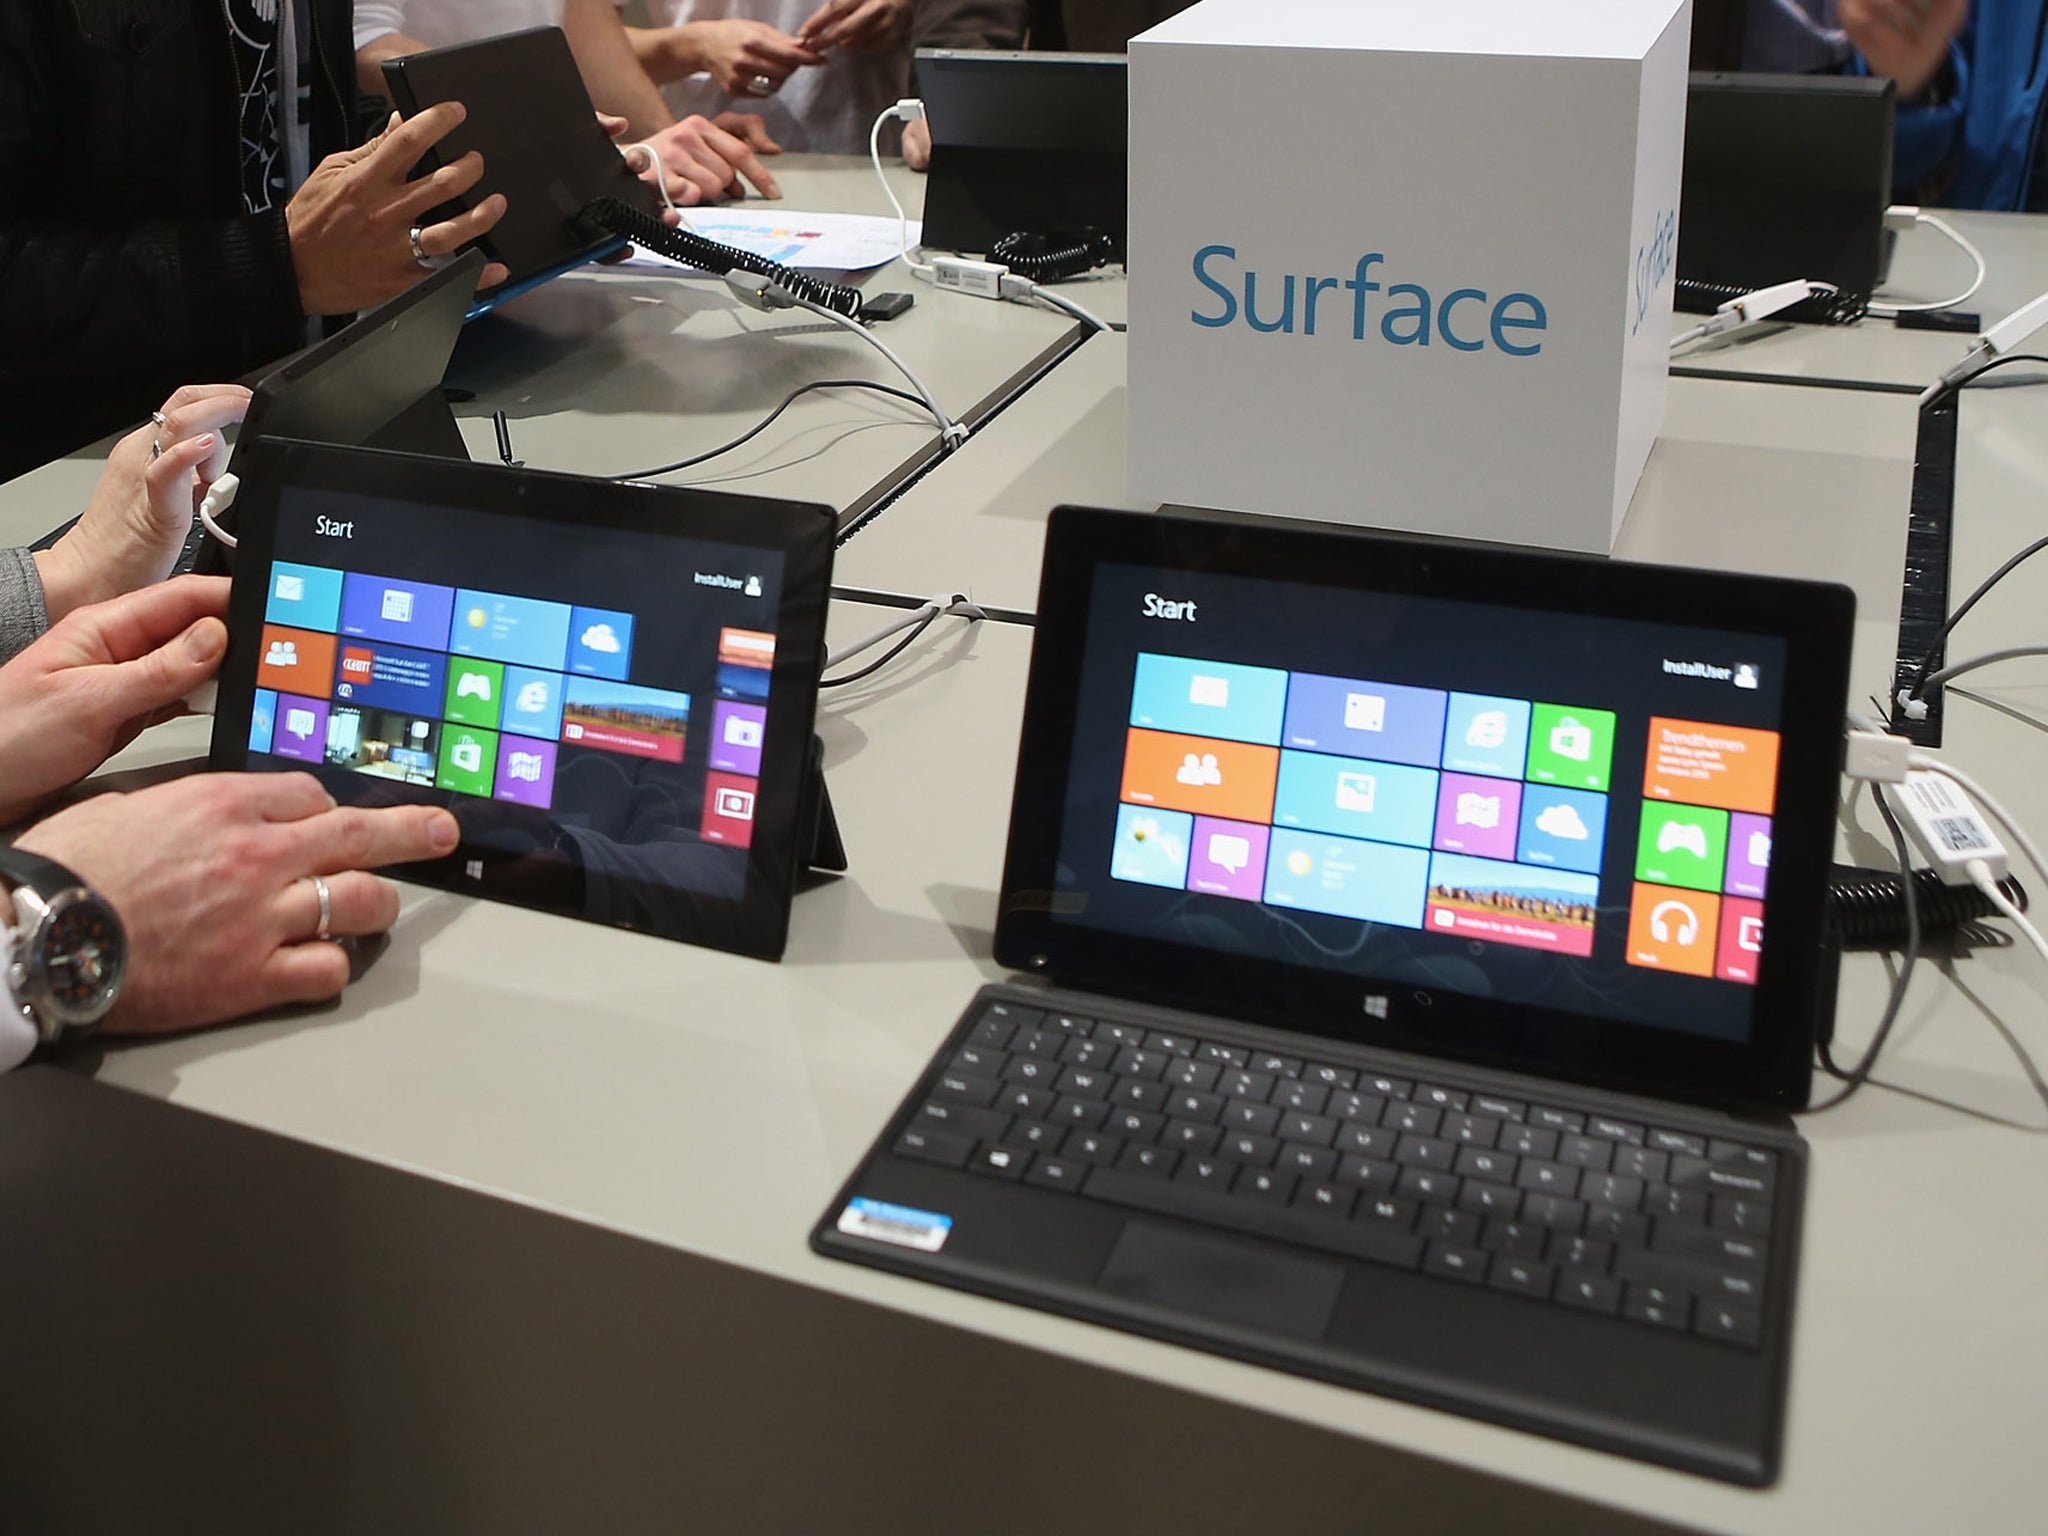 IDC said Microsoft's Windows 8 operating system exacerbated the slowdown by confusing consumers with features that compromise the traditional PC experience